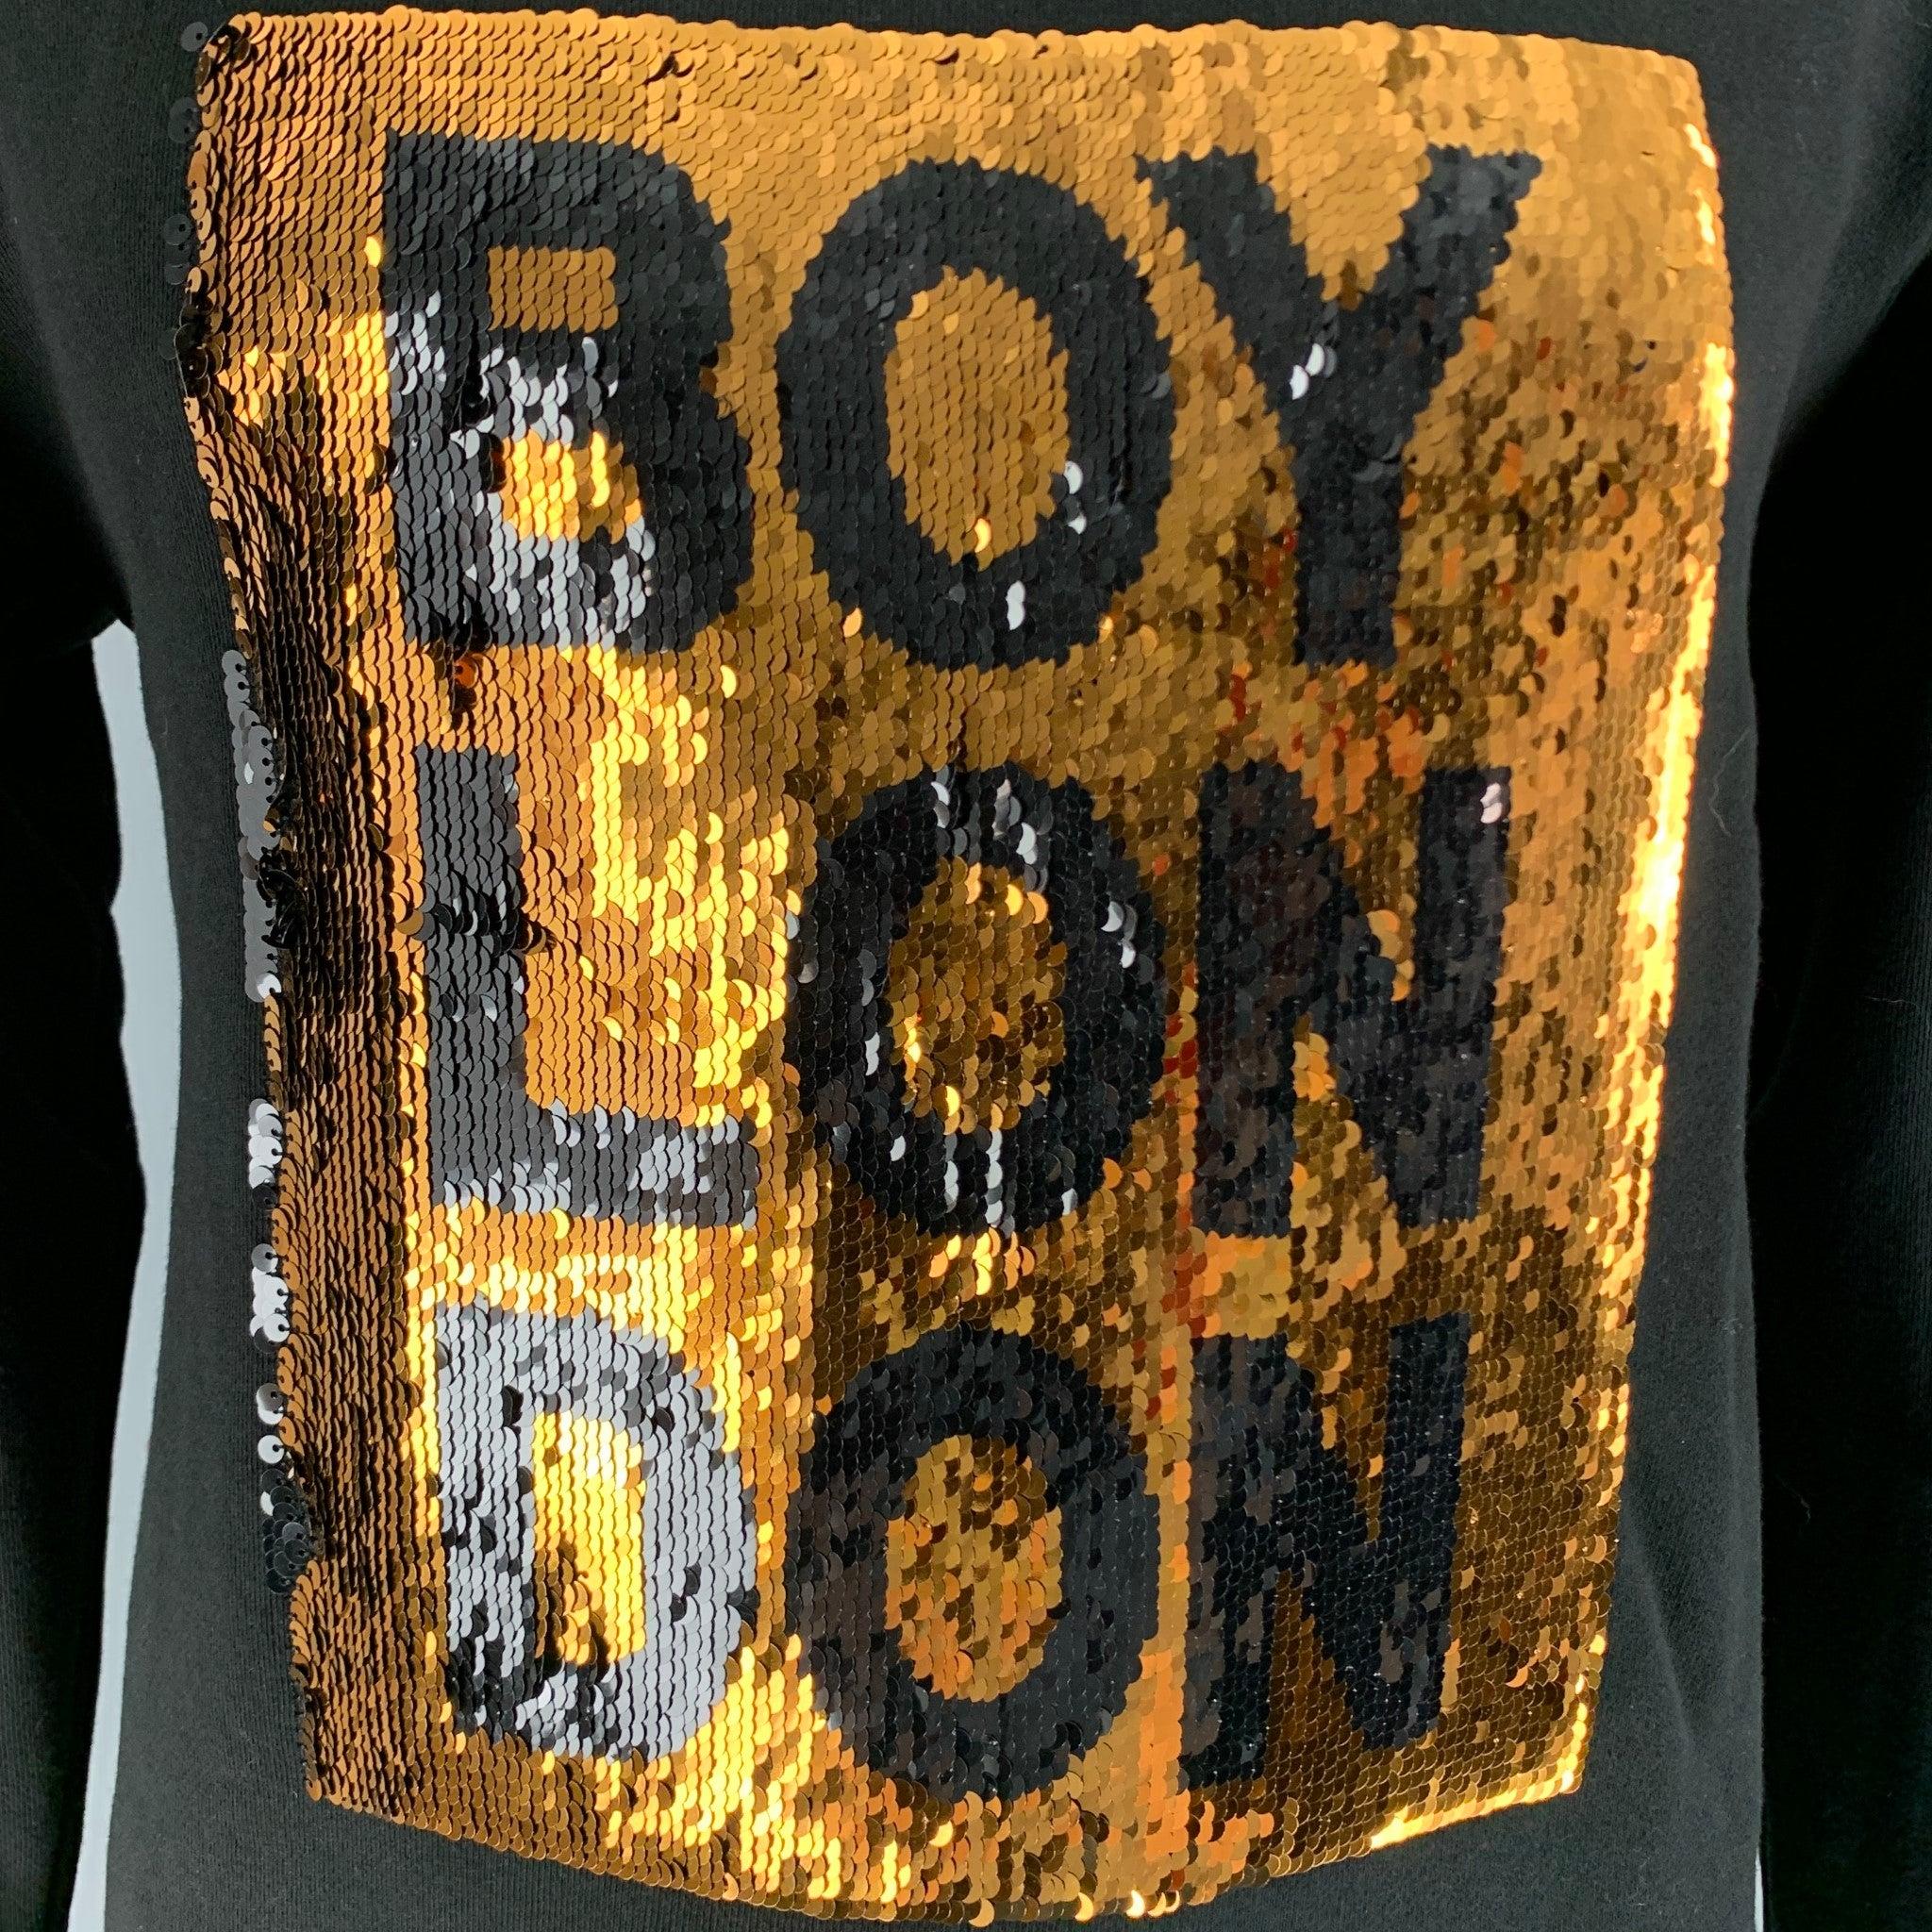 BOY LONDON Sweatshirt comes in a black cotton french terry knit material, with a crewneck, a sequined embellishment at front, and ribbed cuffs and hem.Excellent Pre-Owned Condition. 

Marked:   L 

Measurements: 
 
Shoulder: 24 inches Chest: 48